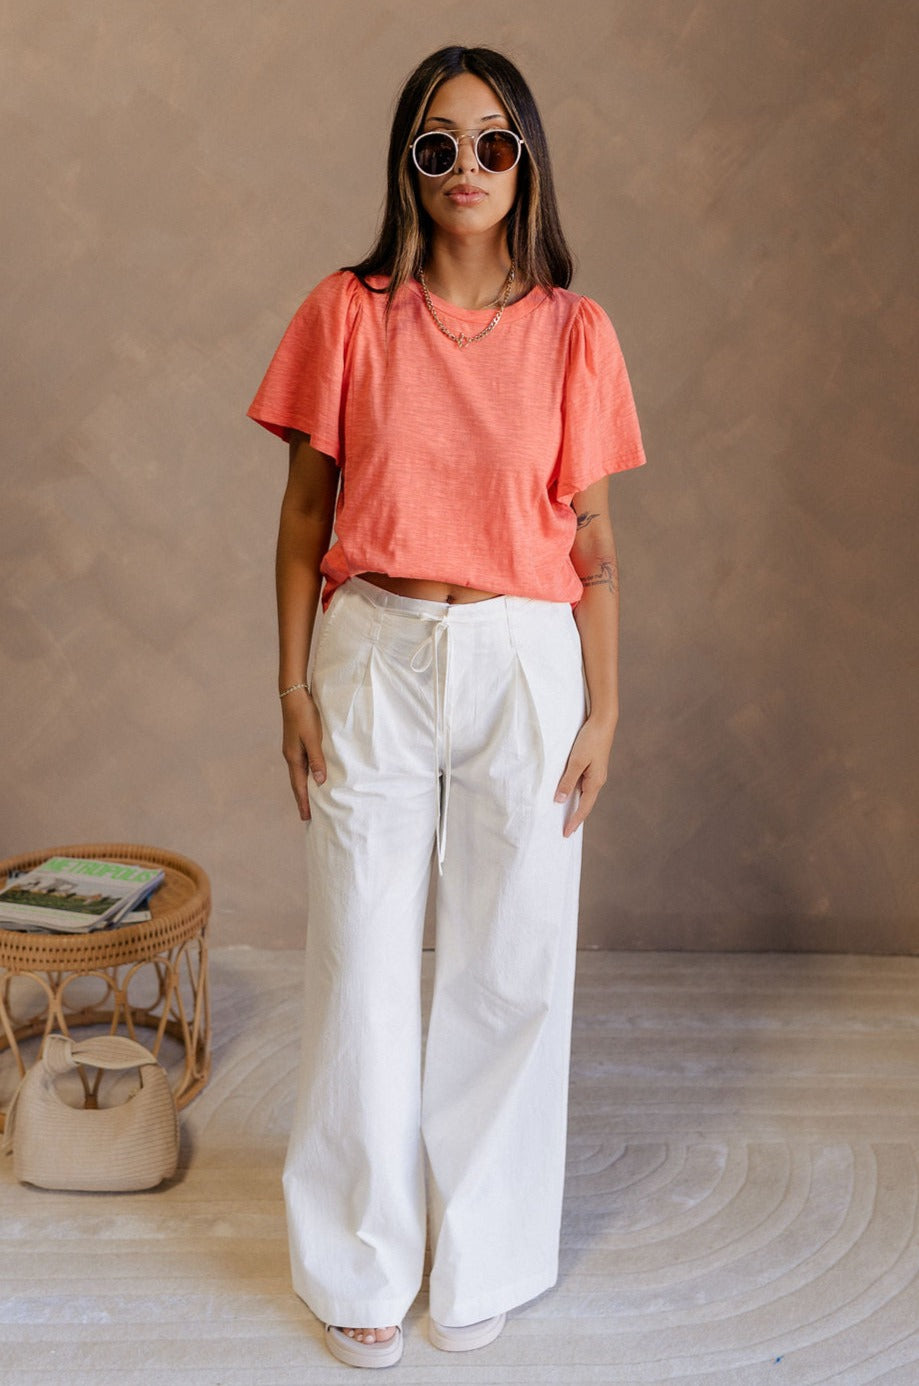 Full body view of female model wearing the Harper Coral Short Sleeve Top which features Coral Cotton Fabric, Round Neckline and Short Sleeves.